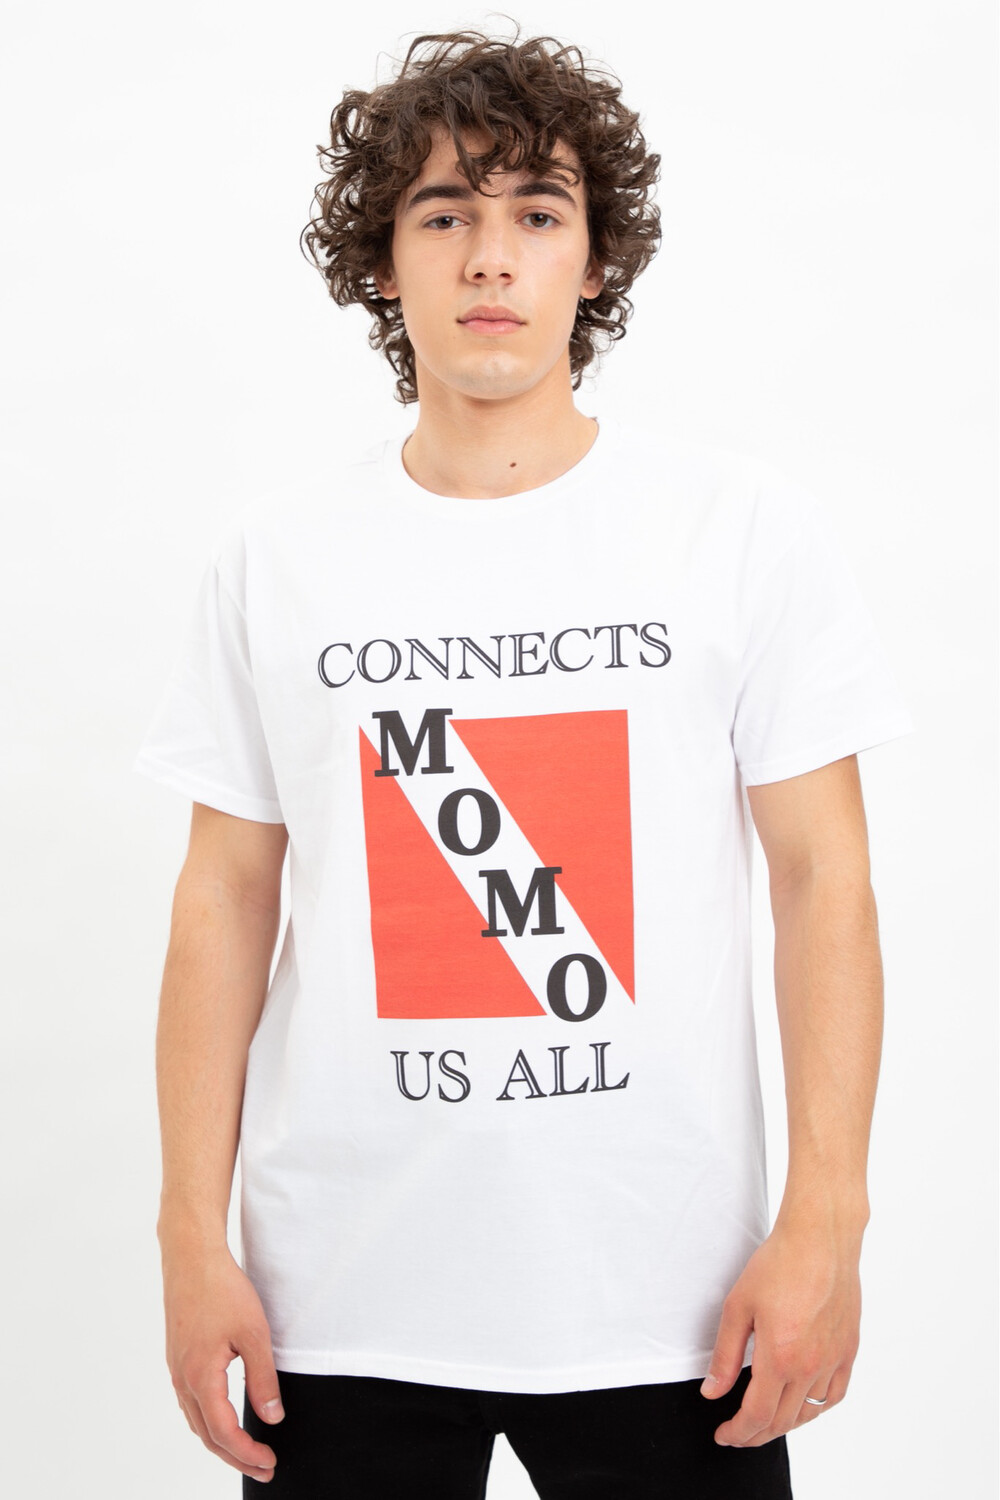 T-SHIRT "MOMO CONNECTS"